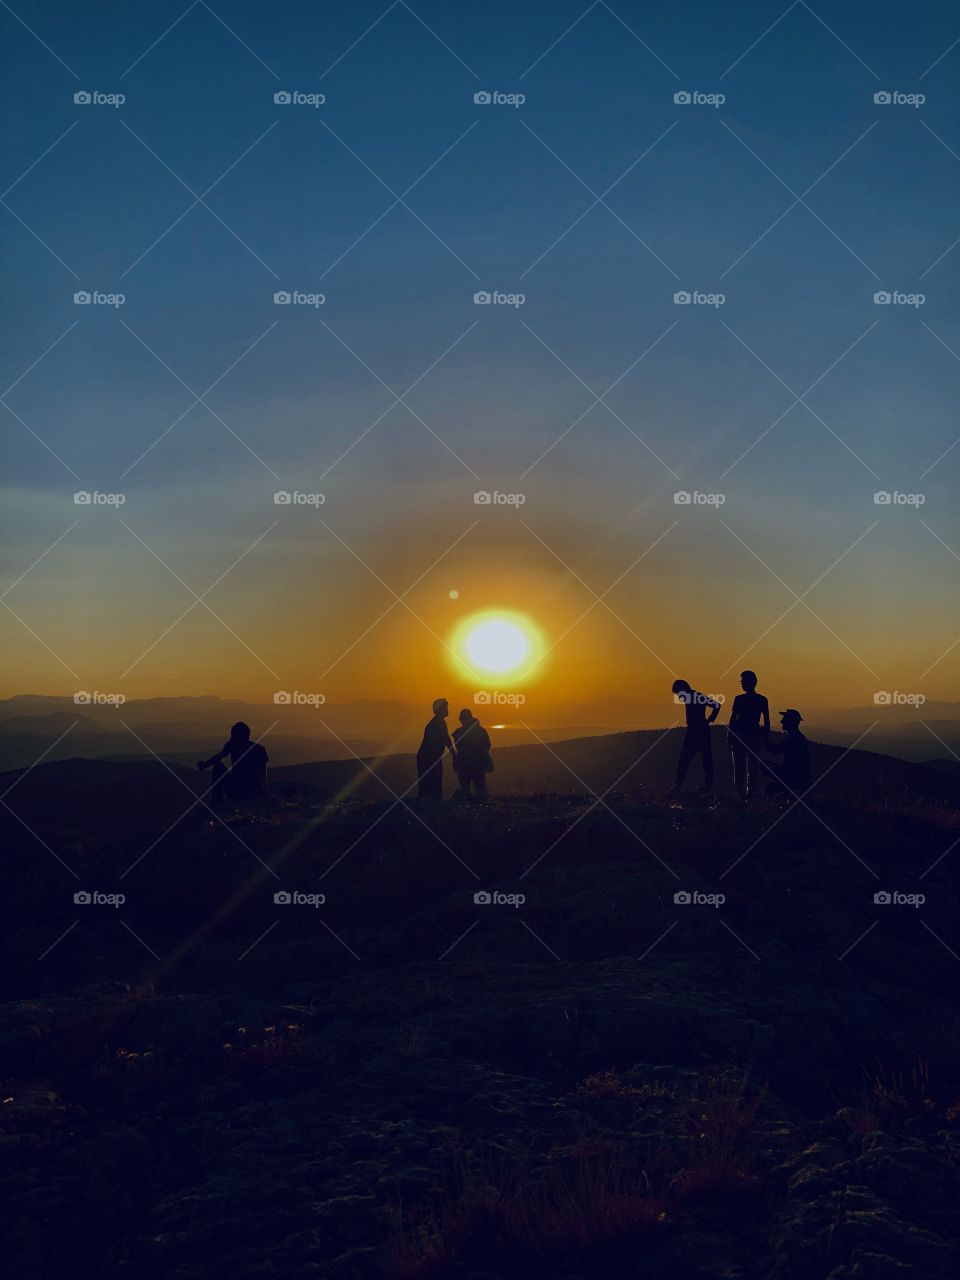 A family photo in a hiking trip who watching the sunset